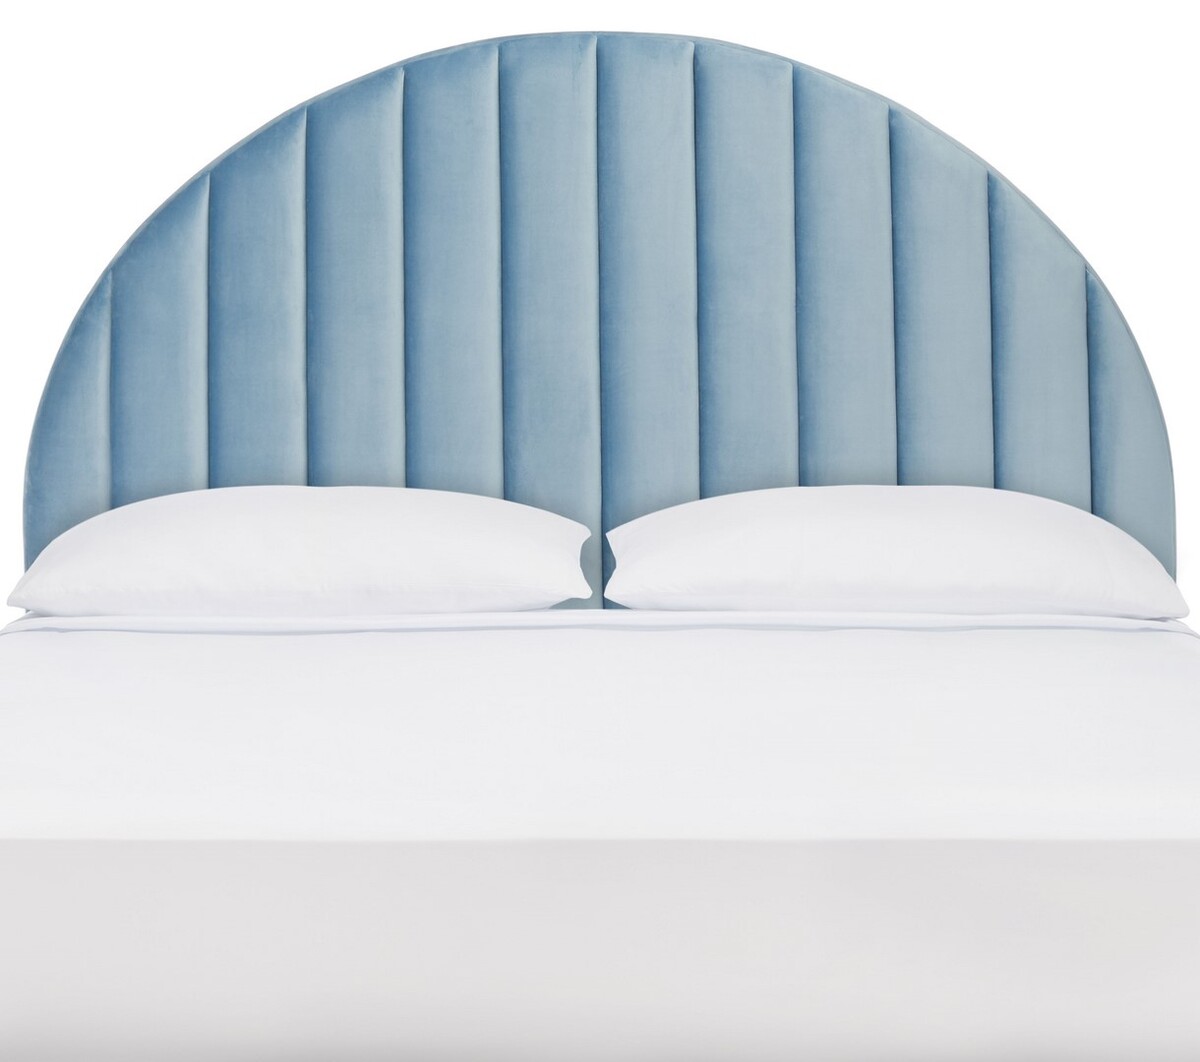 Picture of Safavieh HBD6400A-Q 65 x 4 x 57 in. Solare Striped Arched Headboard - Slate Blue - Queen